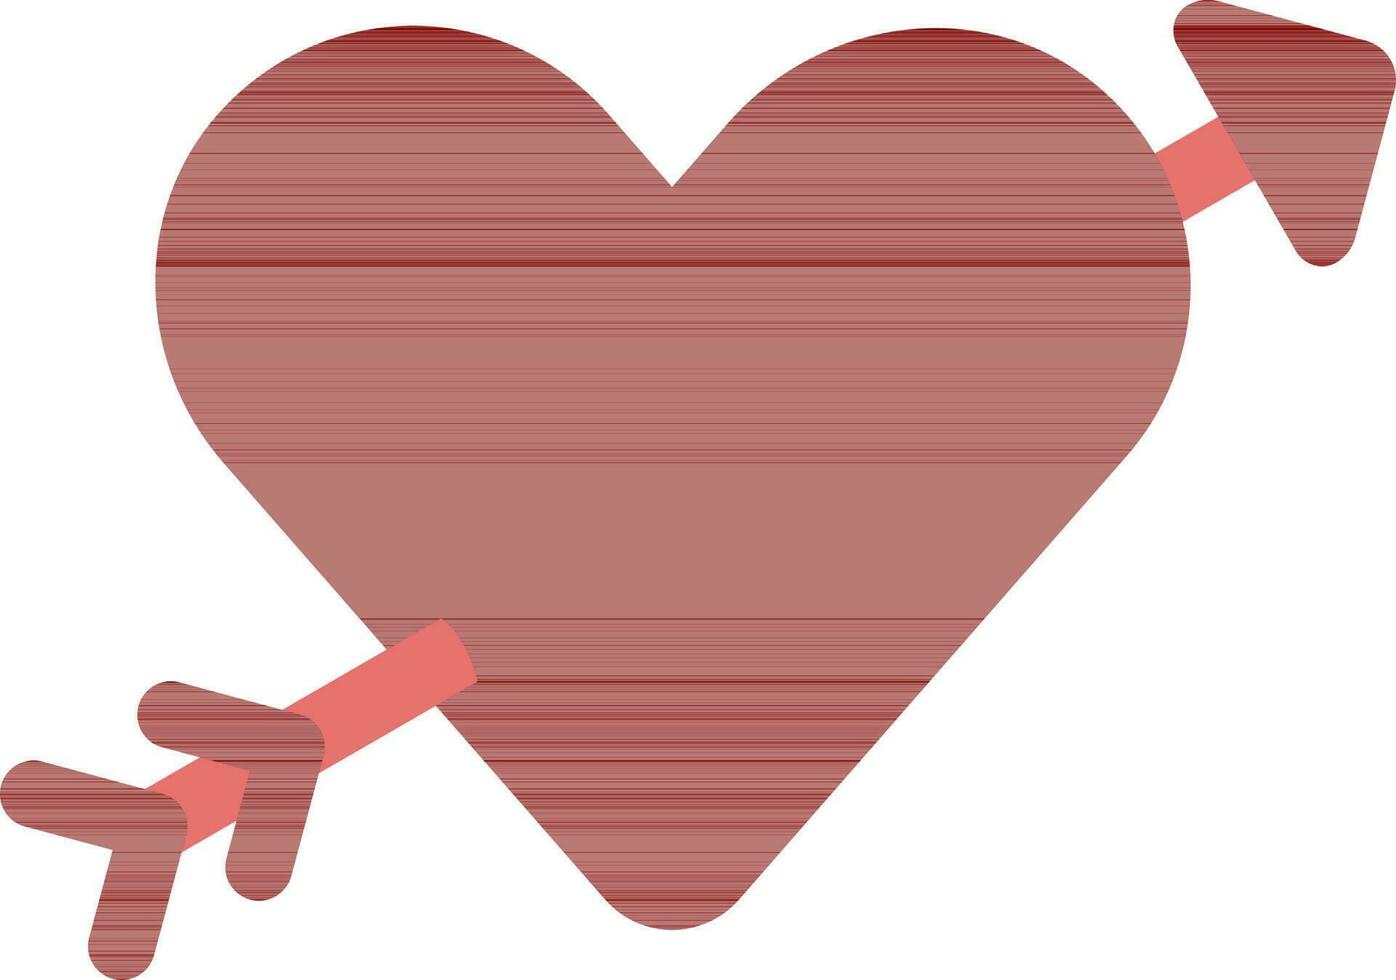 Illustration of Heart With Arrow Icon in Flat Style. vector